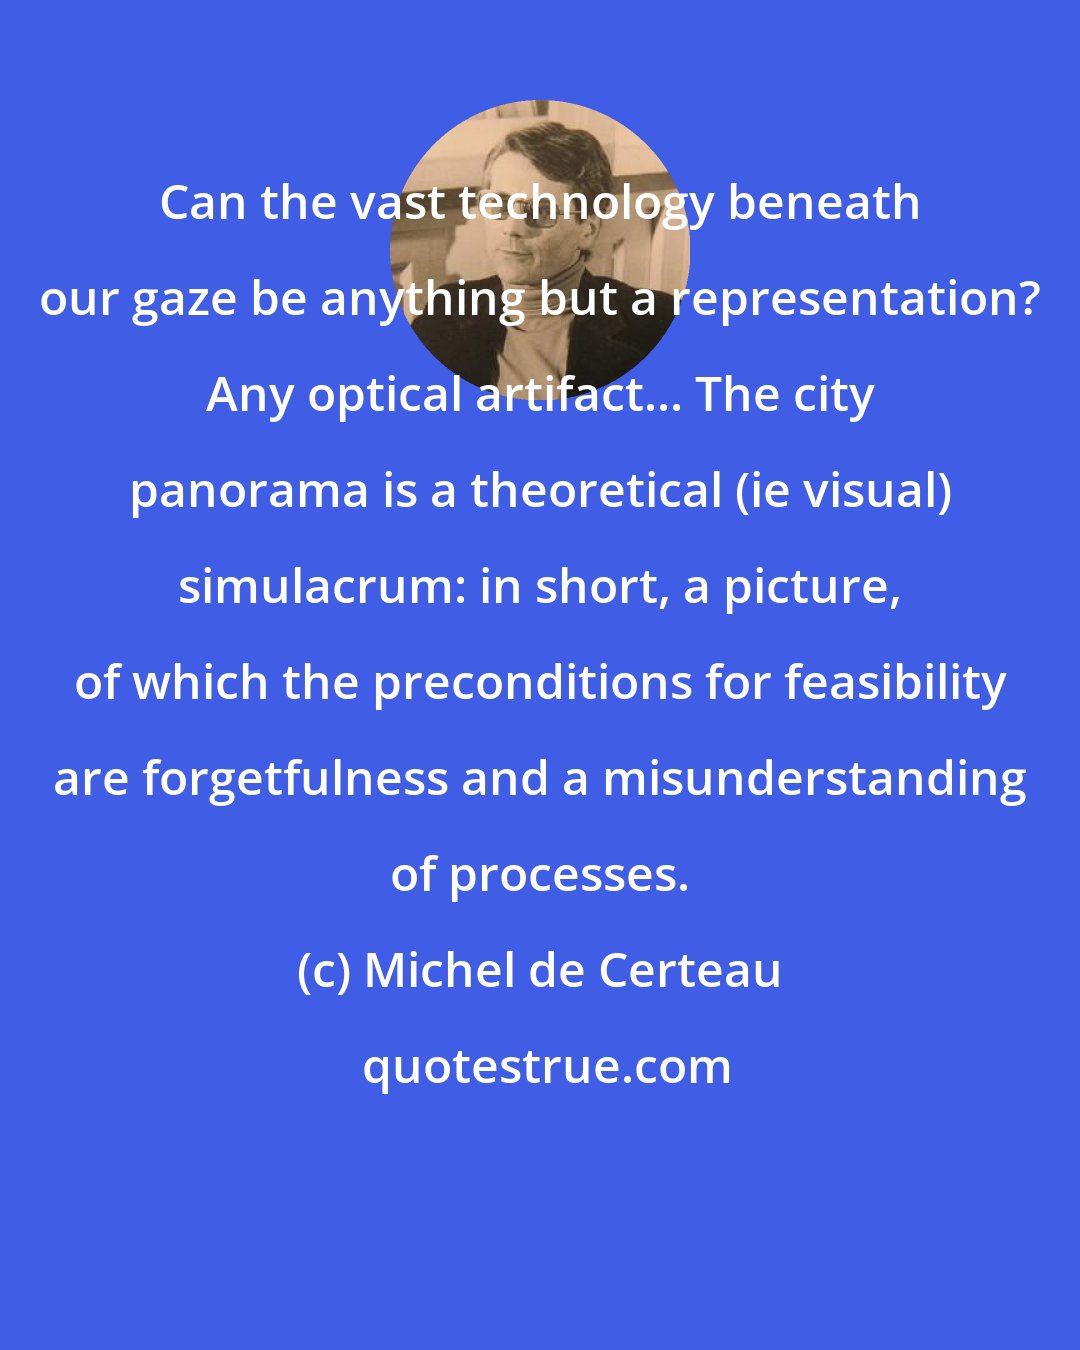 Michel de Certeau: Can the vast technology beneath our gaze be anything but a representation? Any optical artifact... The city panorama is a theoretical (ie visual) simulacrum: in short, a picture, of which the preconditions for feasibility are forgetfulness and a misunderstanding of processes.